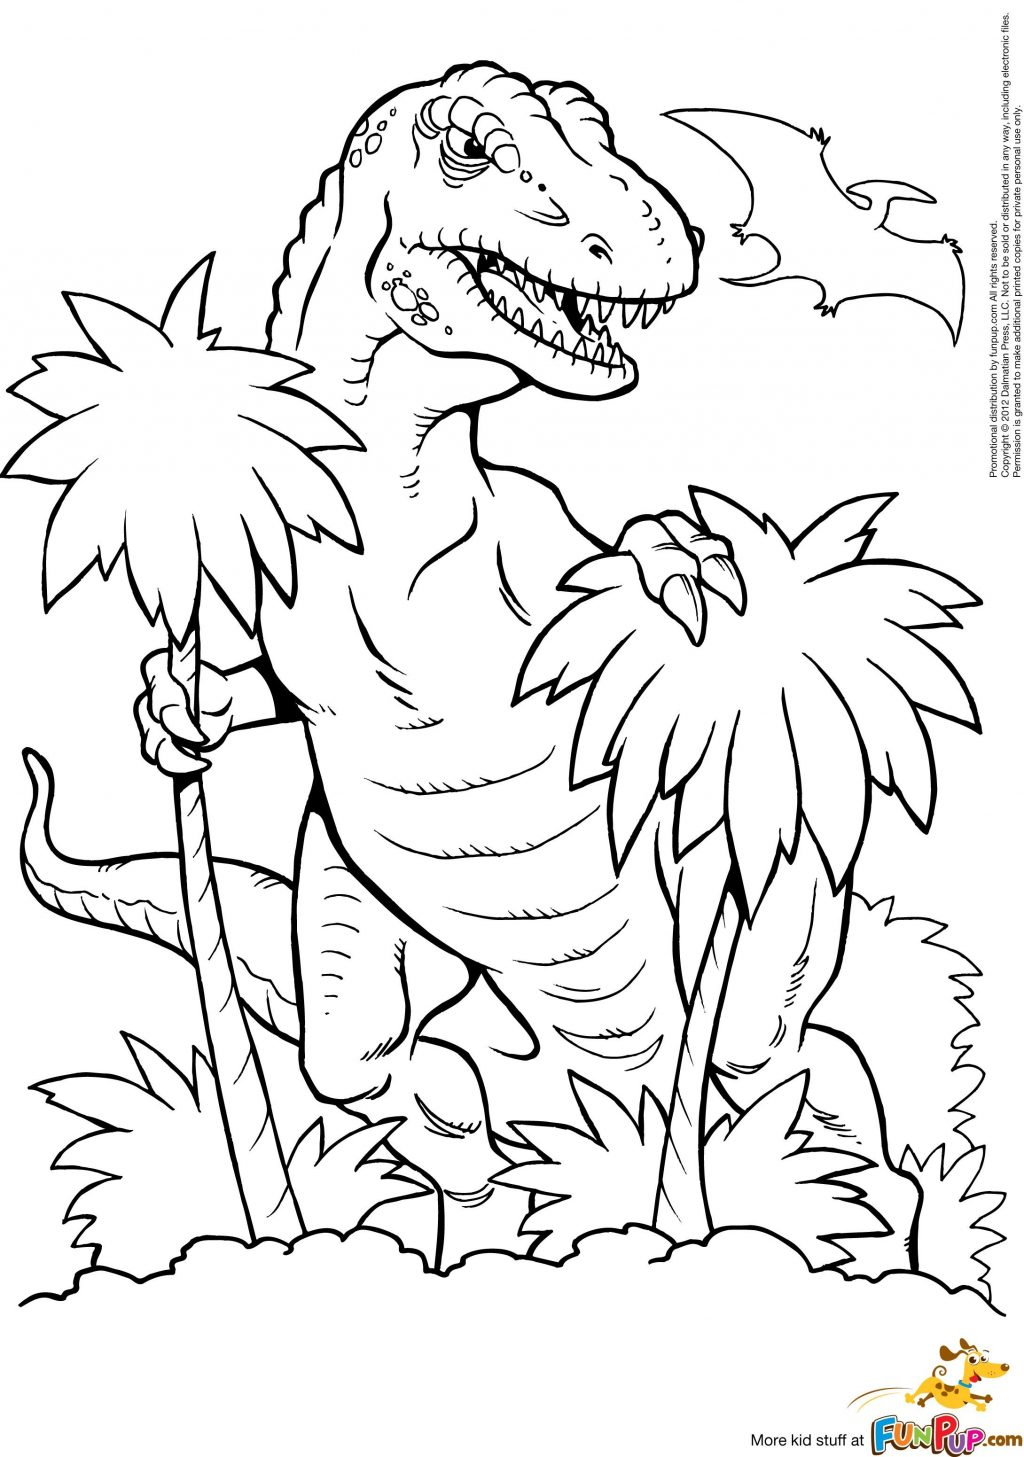 Coloring Pages On Pinterest Coloring Pages And Books Large T Rex Dinosaur Pinterest Coloring